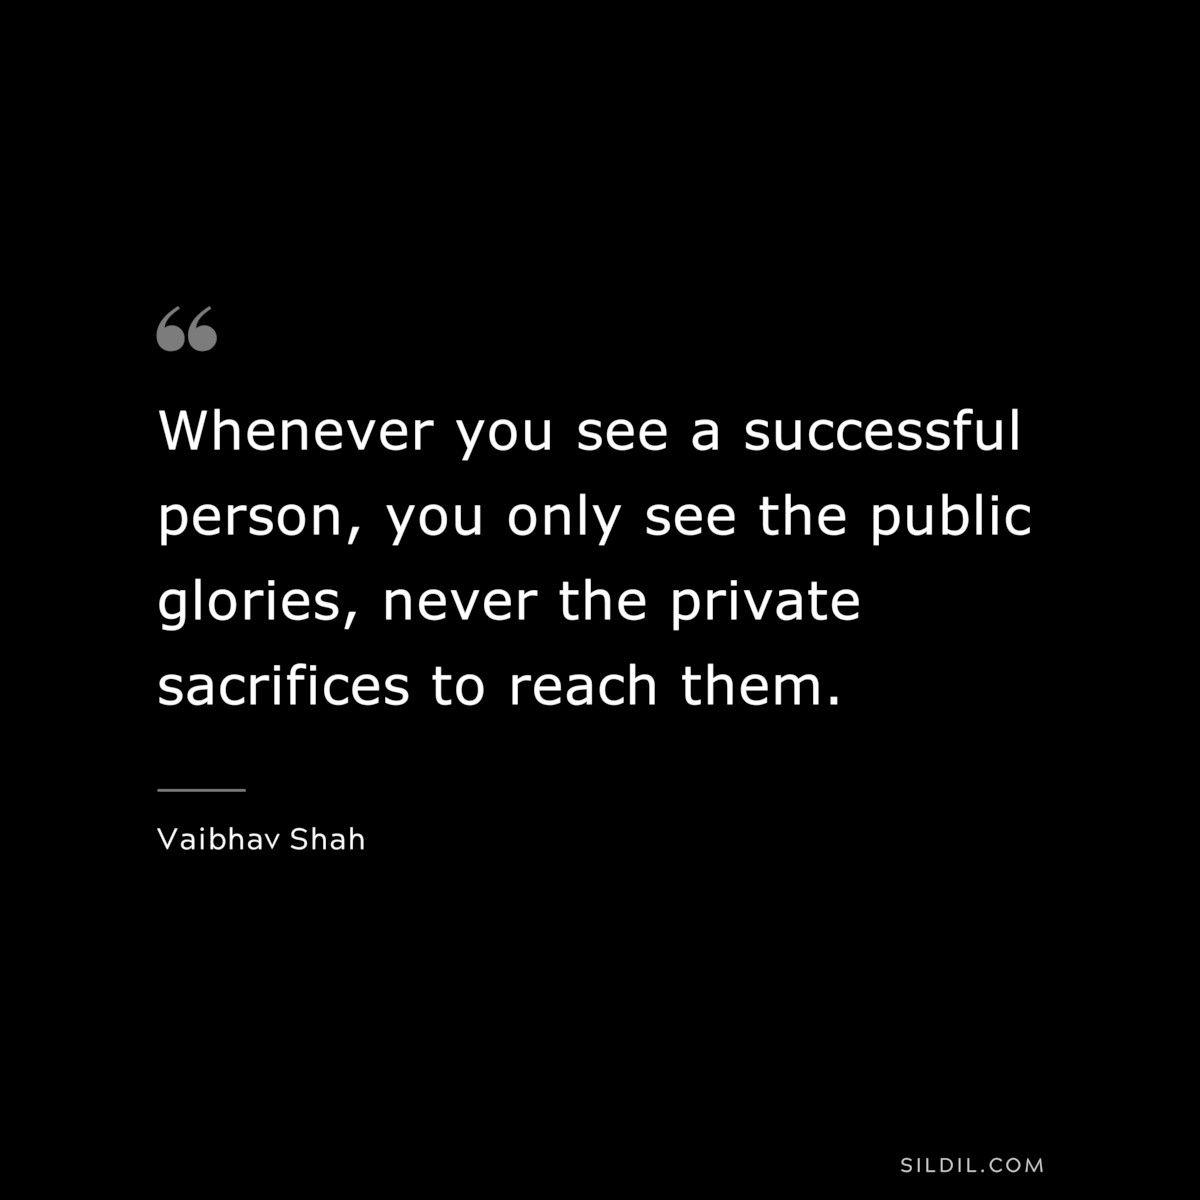 Whenever you see a successful person, you only see the public glories, never the private sacrifices to reach them. ― Vaibhav Shah